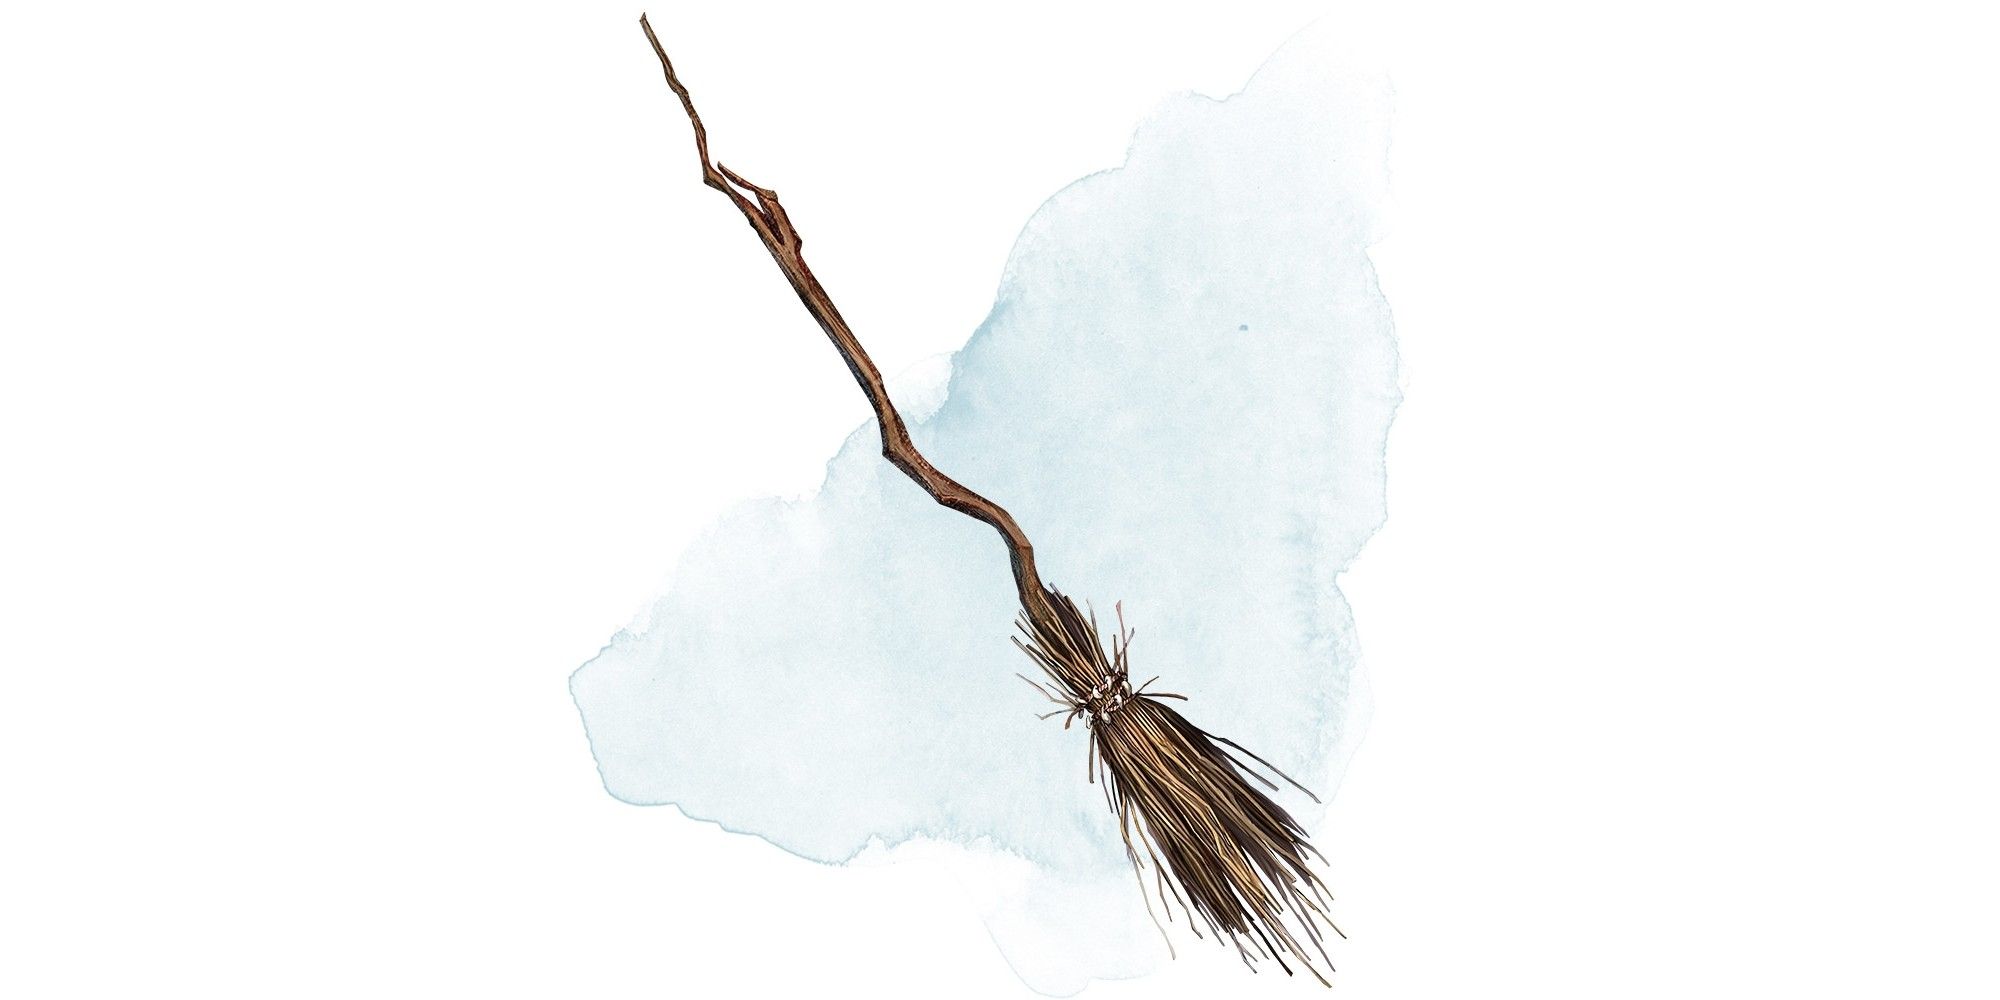 D&D Broom of Flying, a brown broom on a white background.